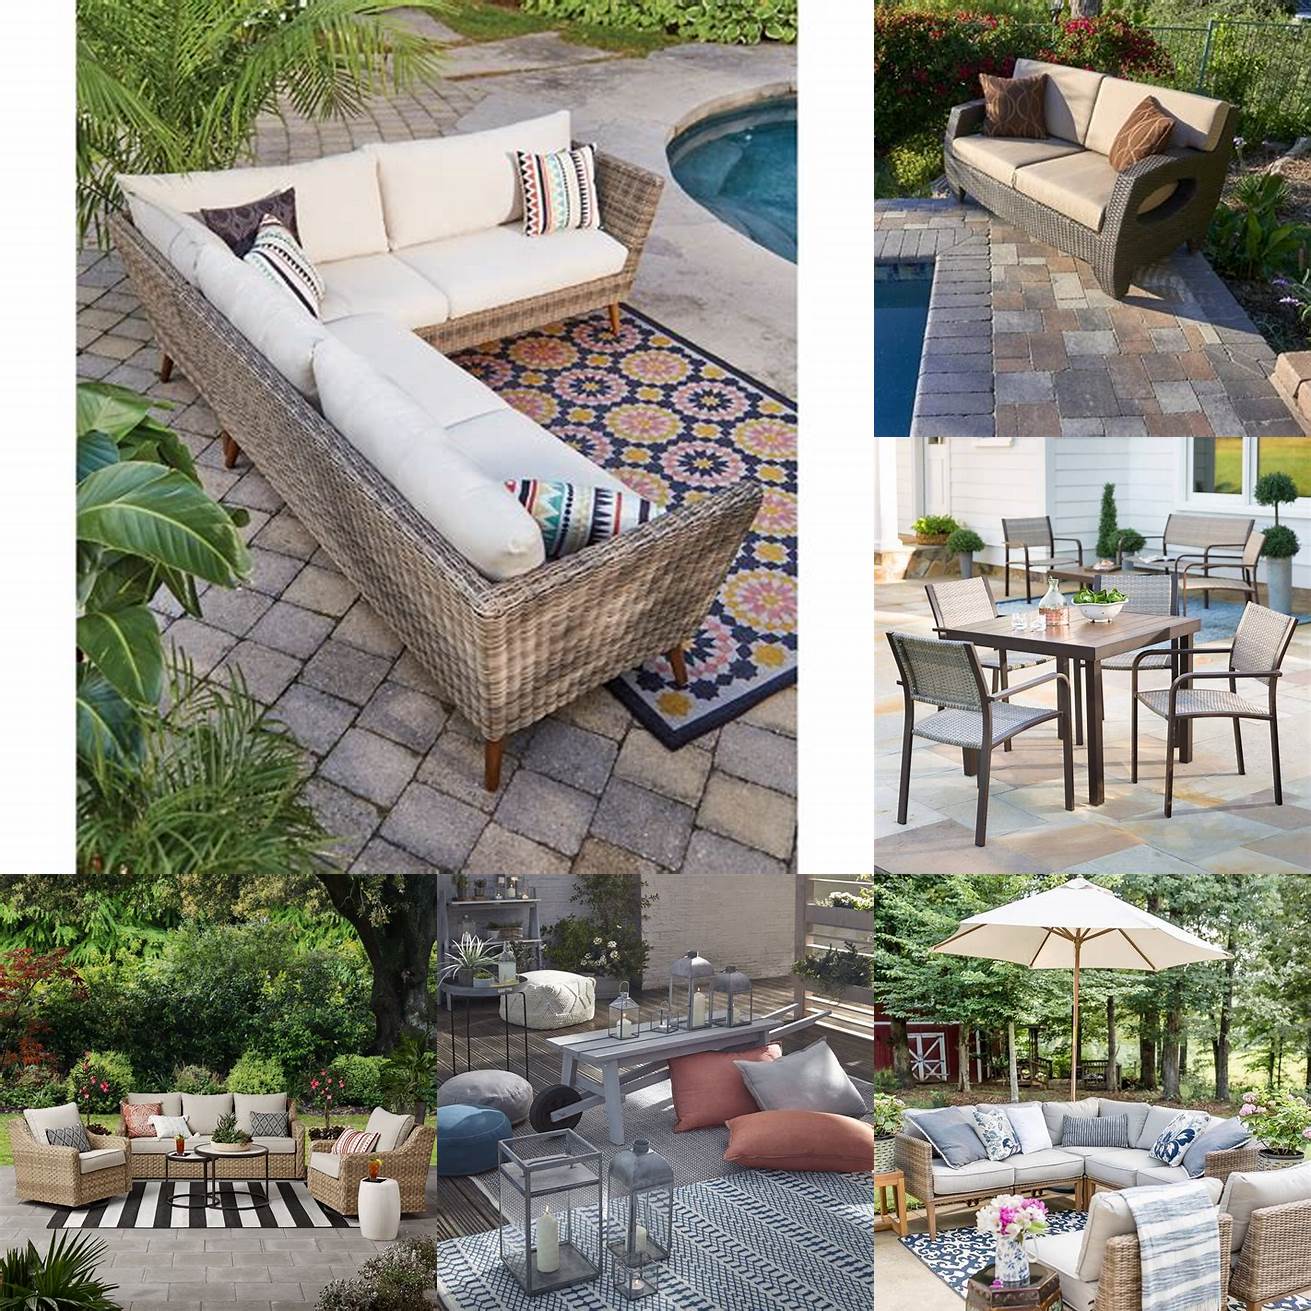 Choose a style that complements your other outdoor furniture